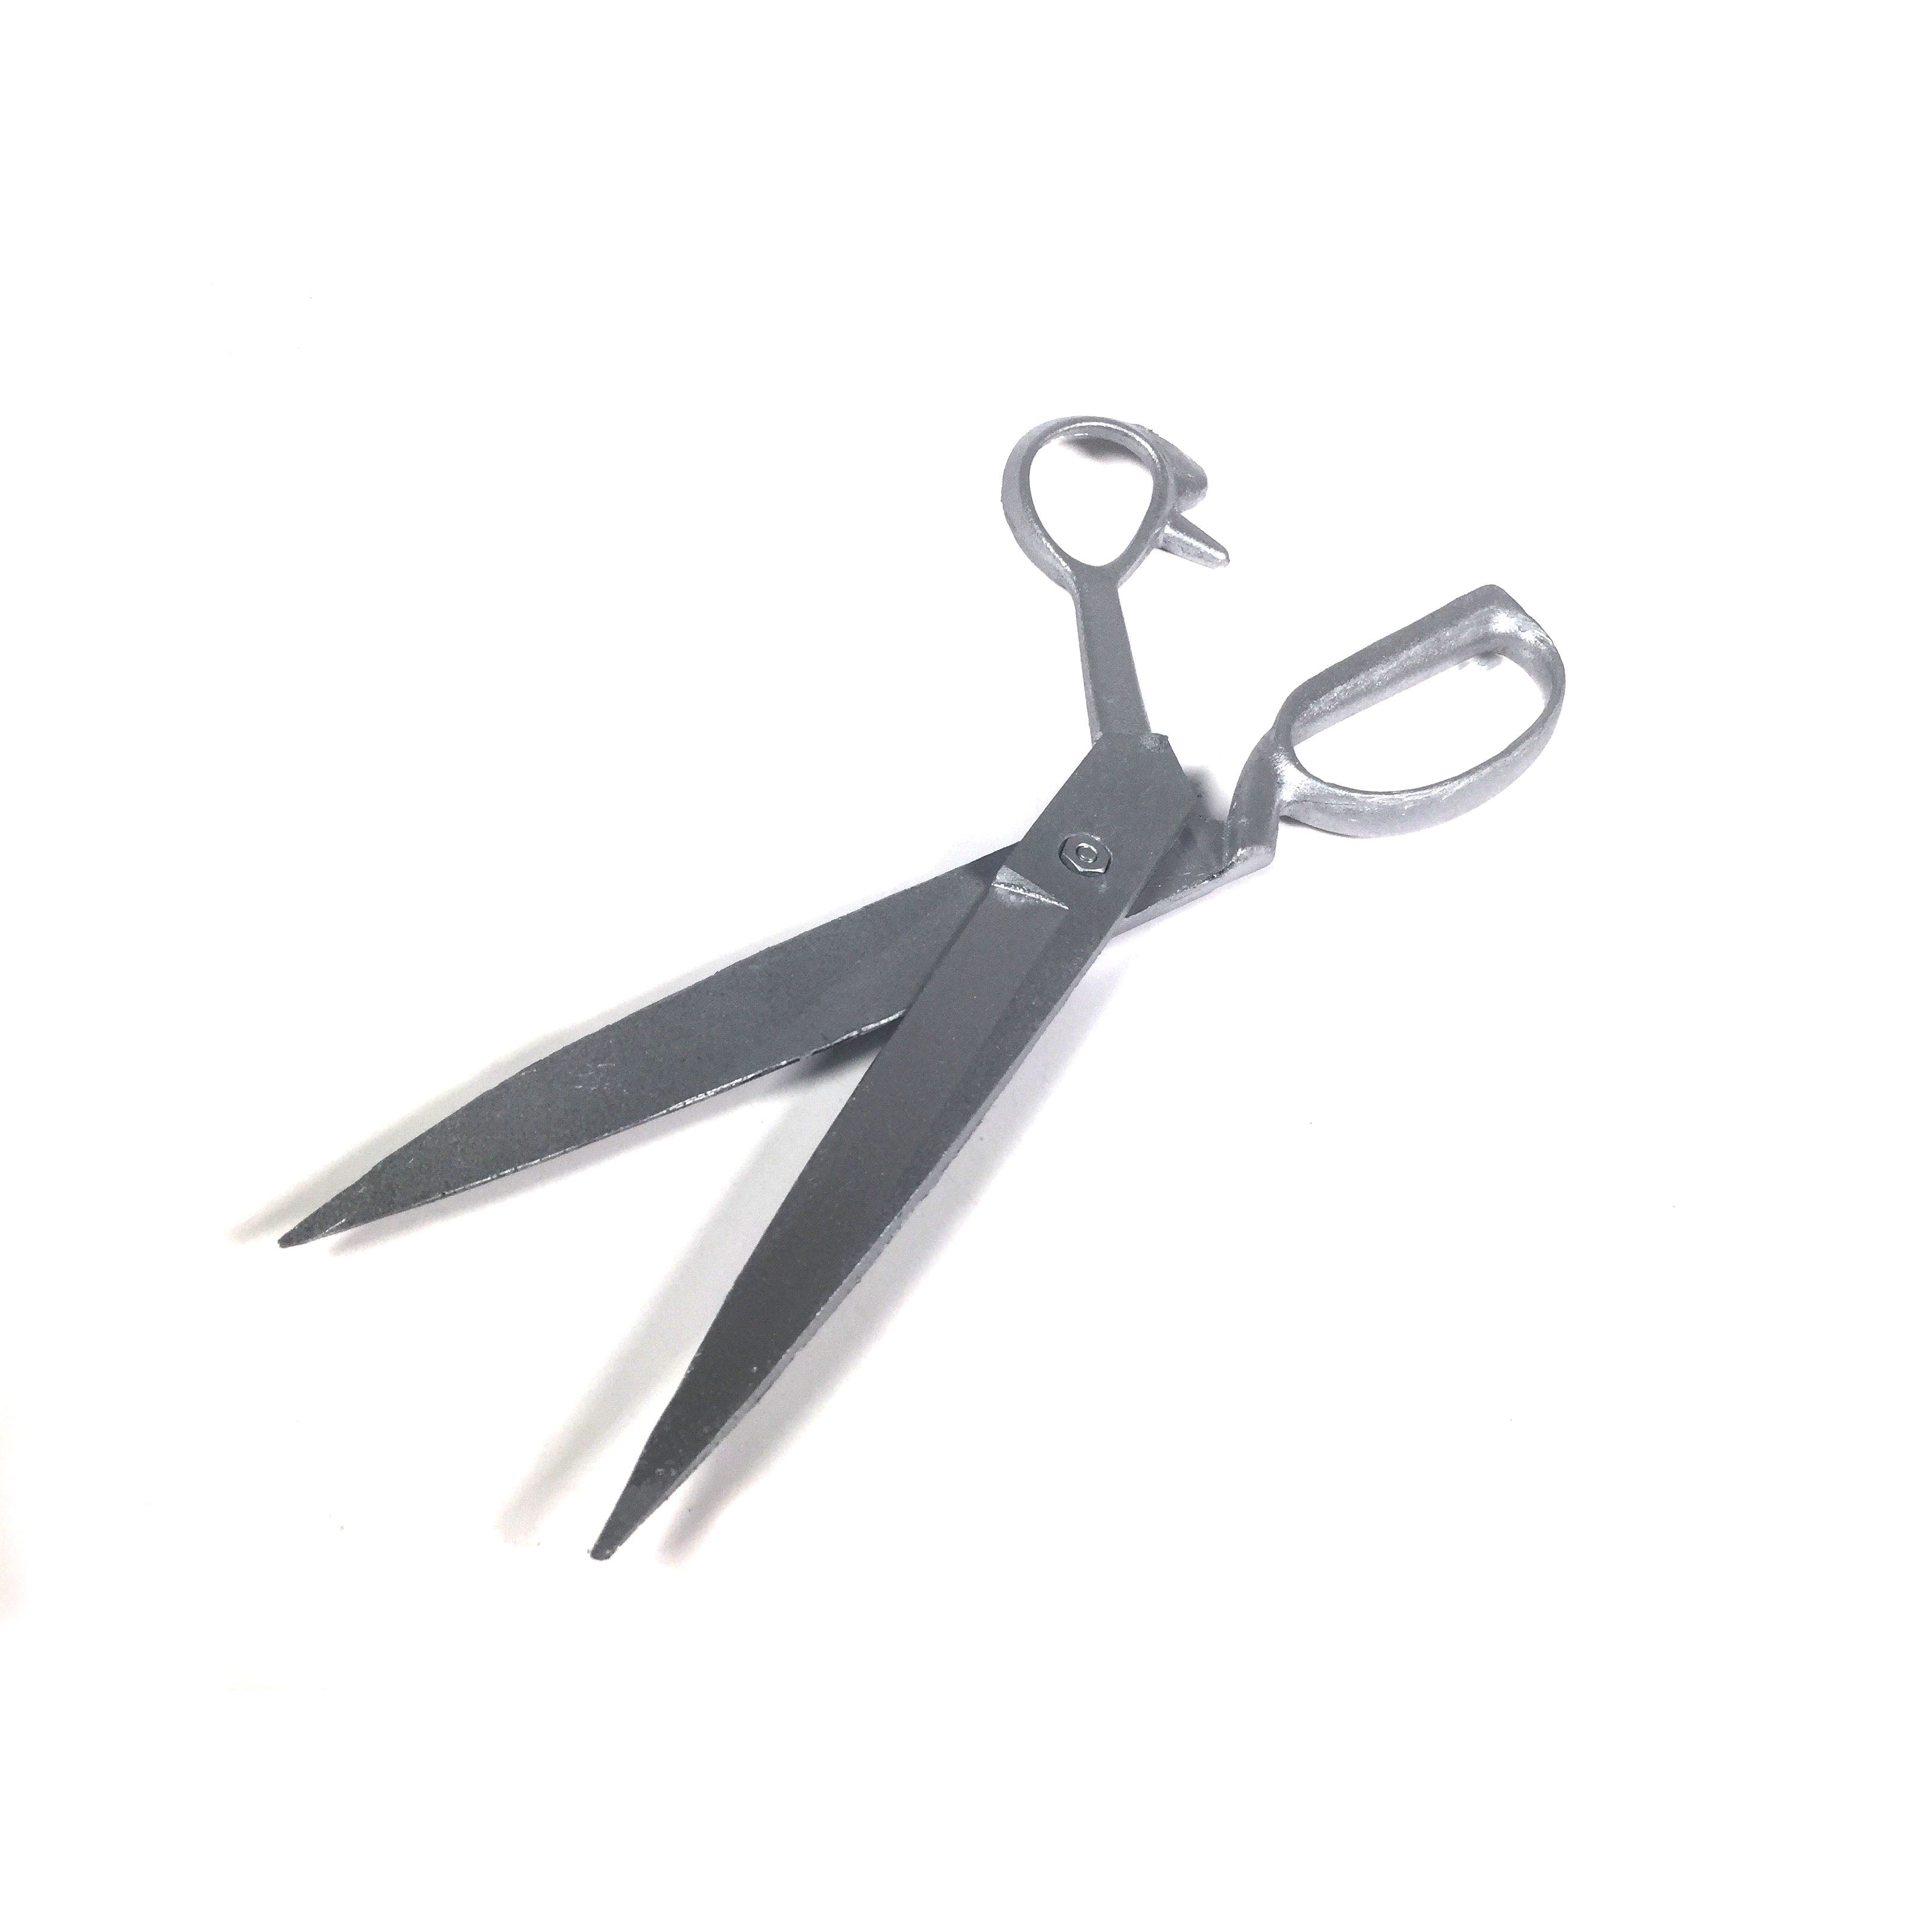 Large Foam Rubber Scissors or Shears with Functional Moving Parts - New - Chrome